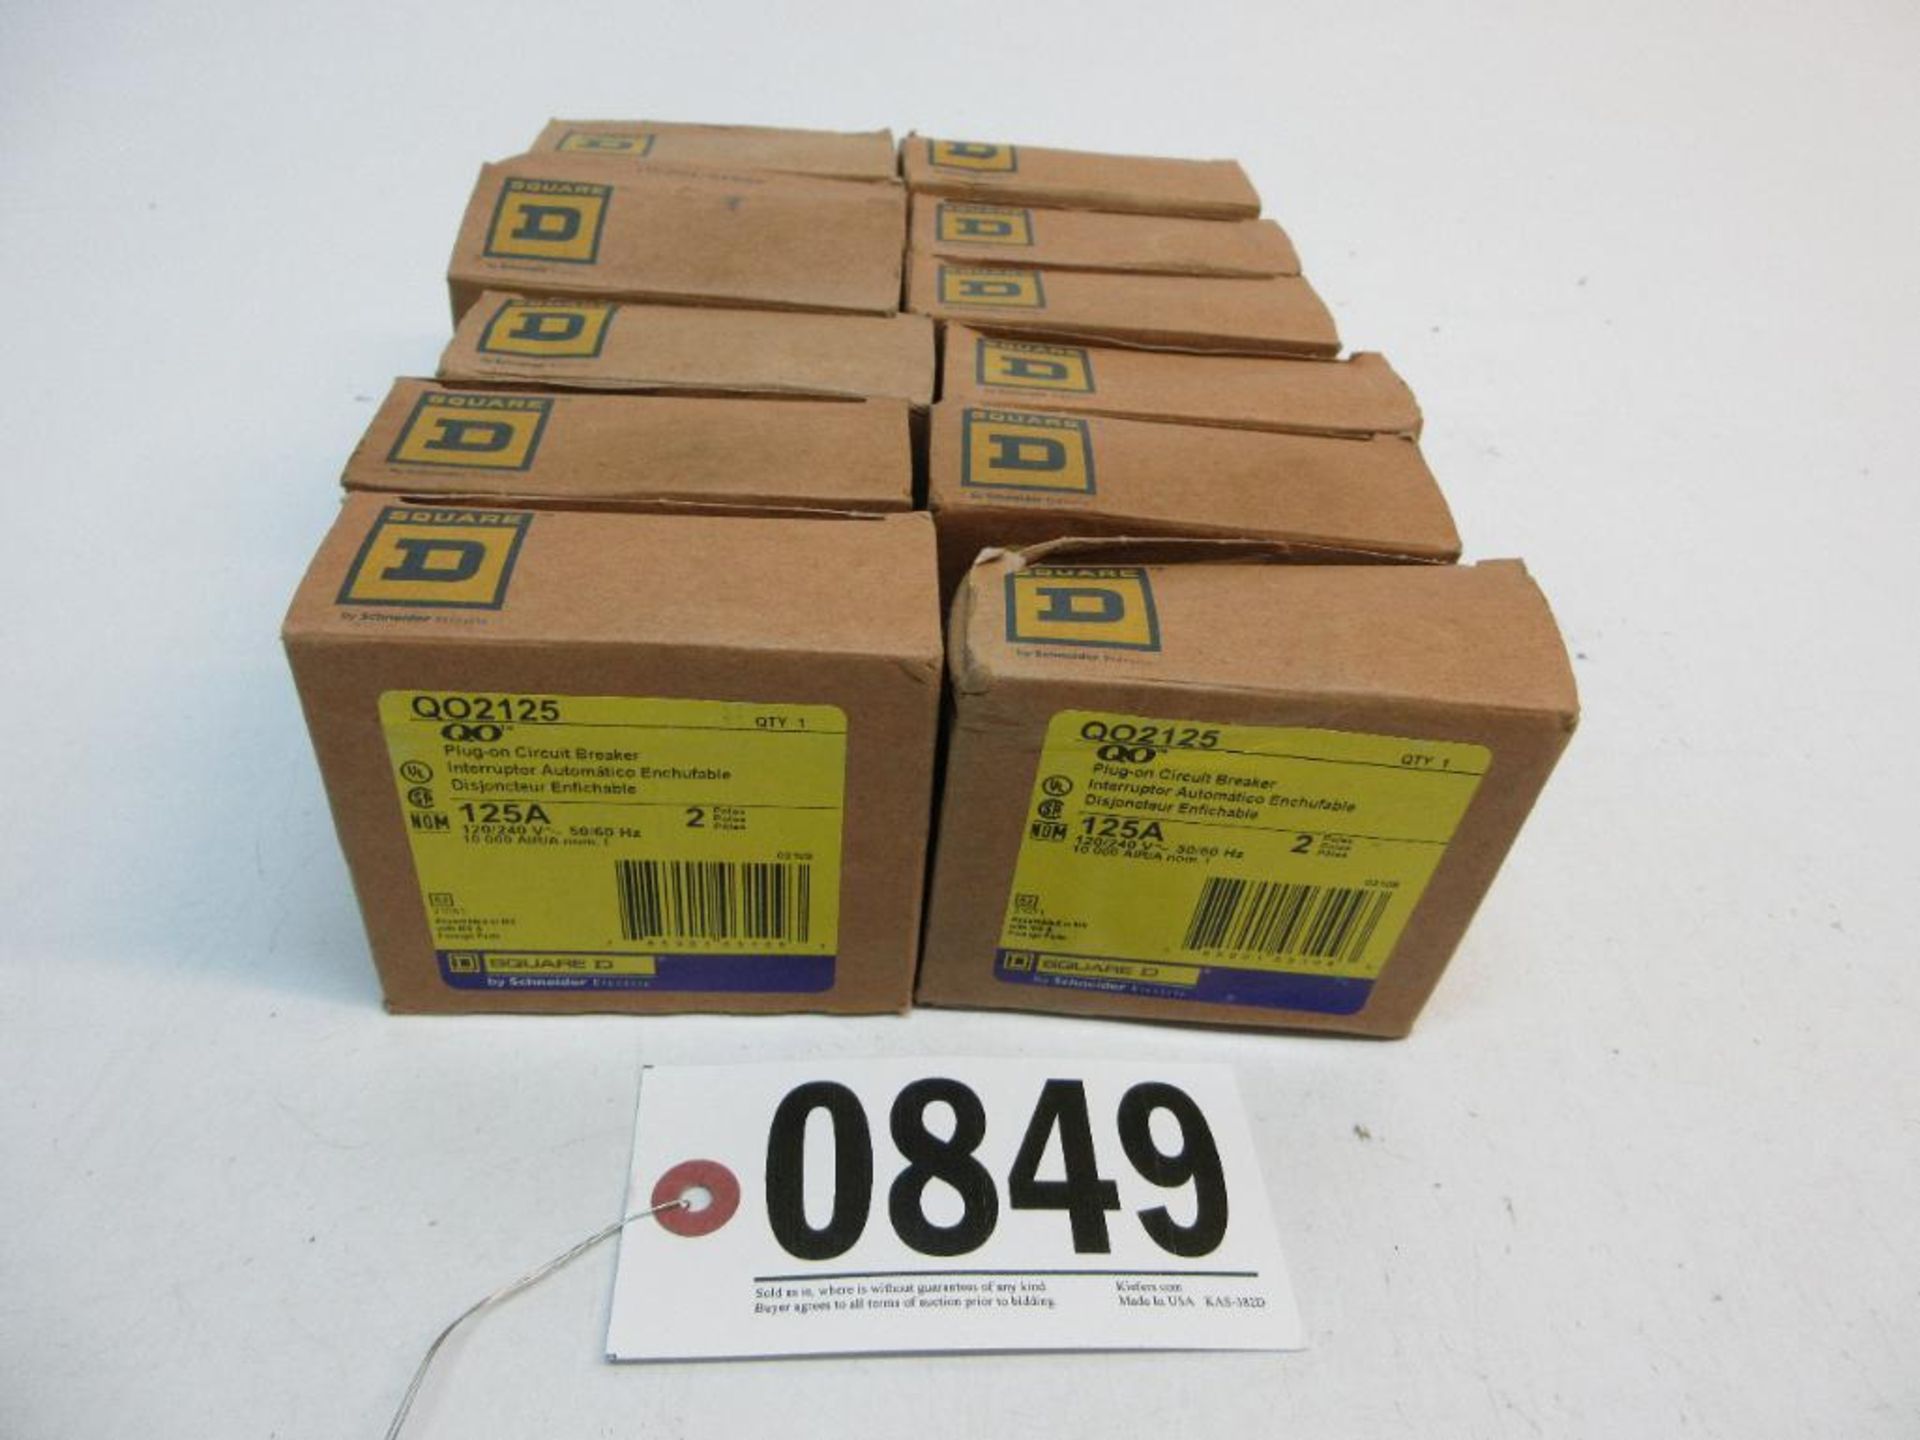 (12) SQUARE D Q02125 PLUG-ON CIRCUIT BREAKER 125A 2 POLE NEW (THIS LOT IS FOB CAMARILLO CA) - (There